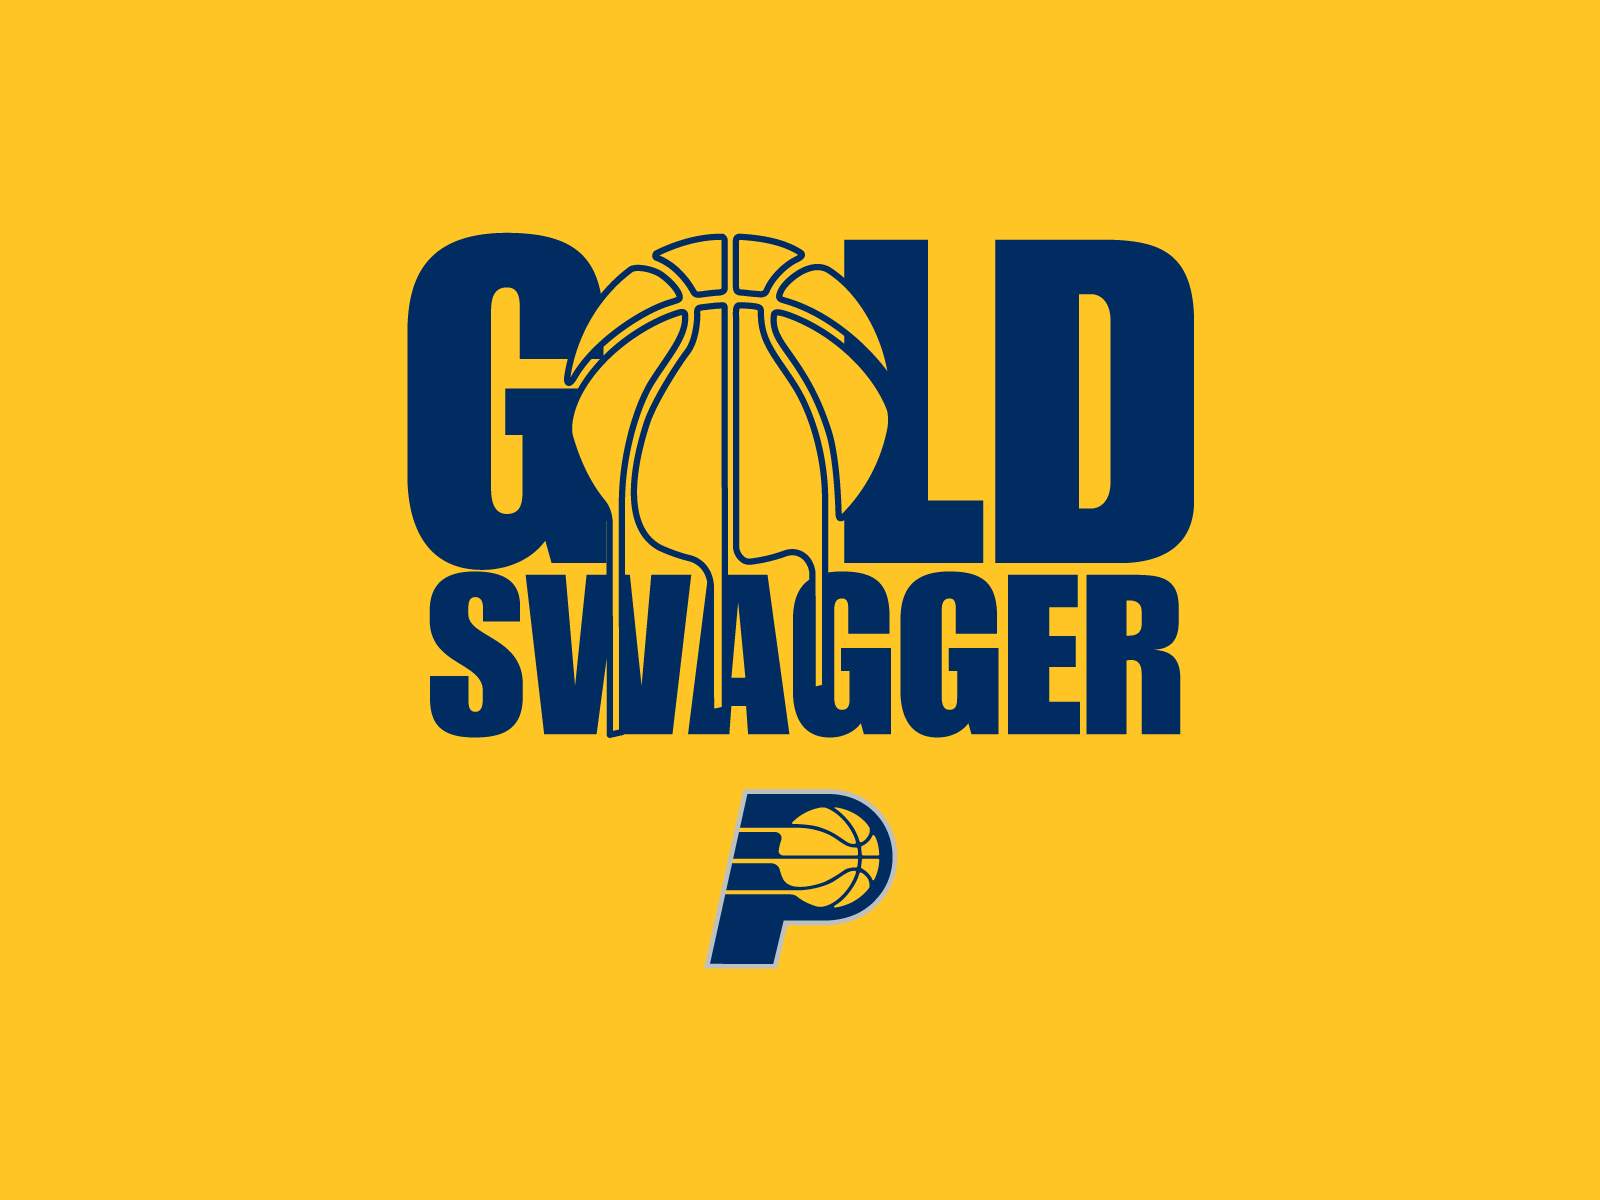 swagger wallpaper,yellow,logo,font,text,graphics